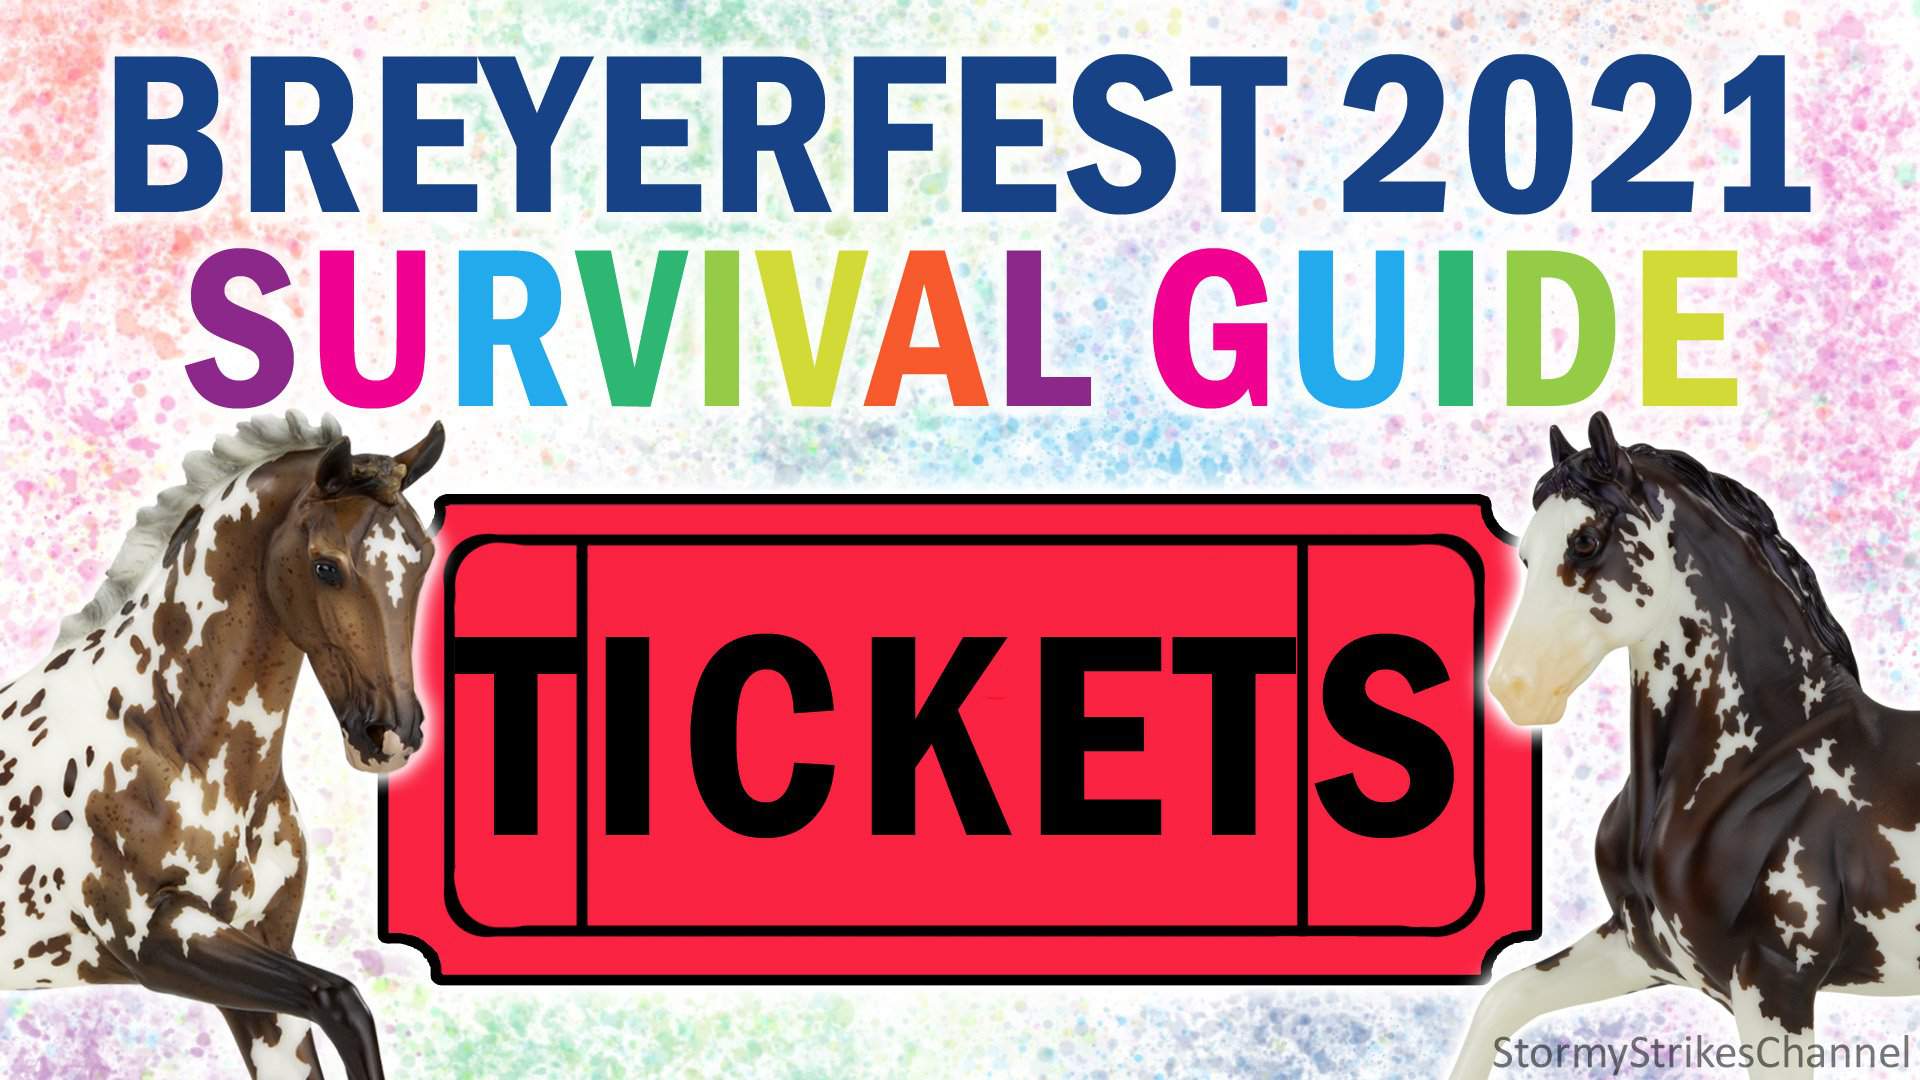 BreyerFest 2021 Survival Guide VIRTUAL TICKETS Prices, What They